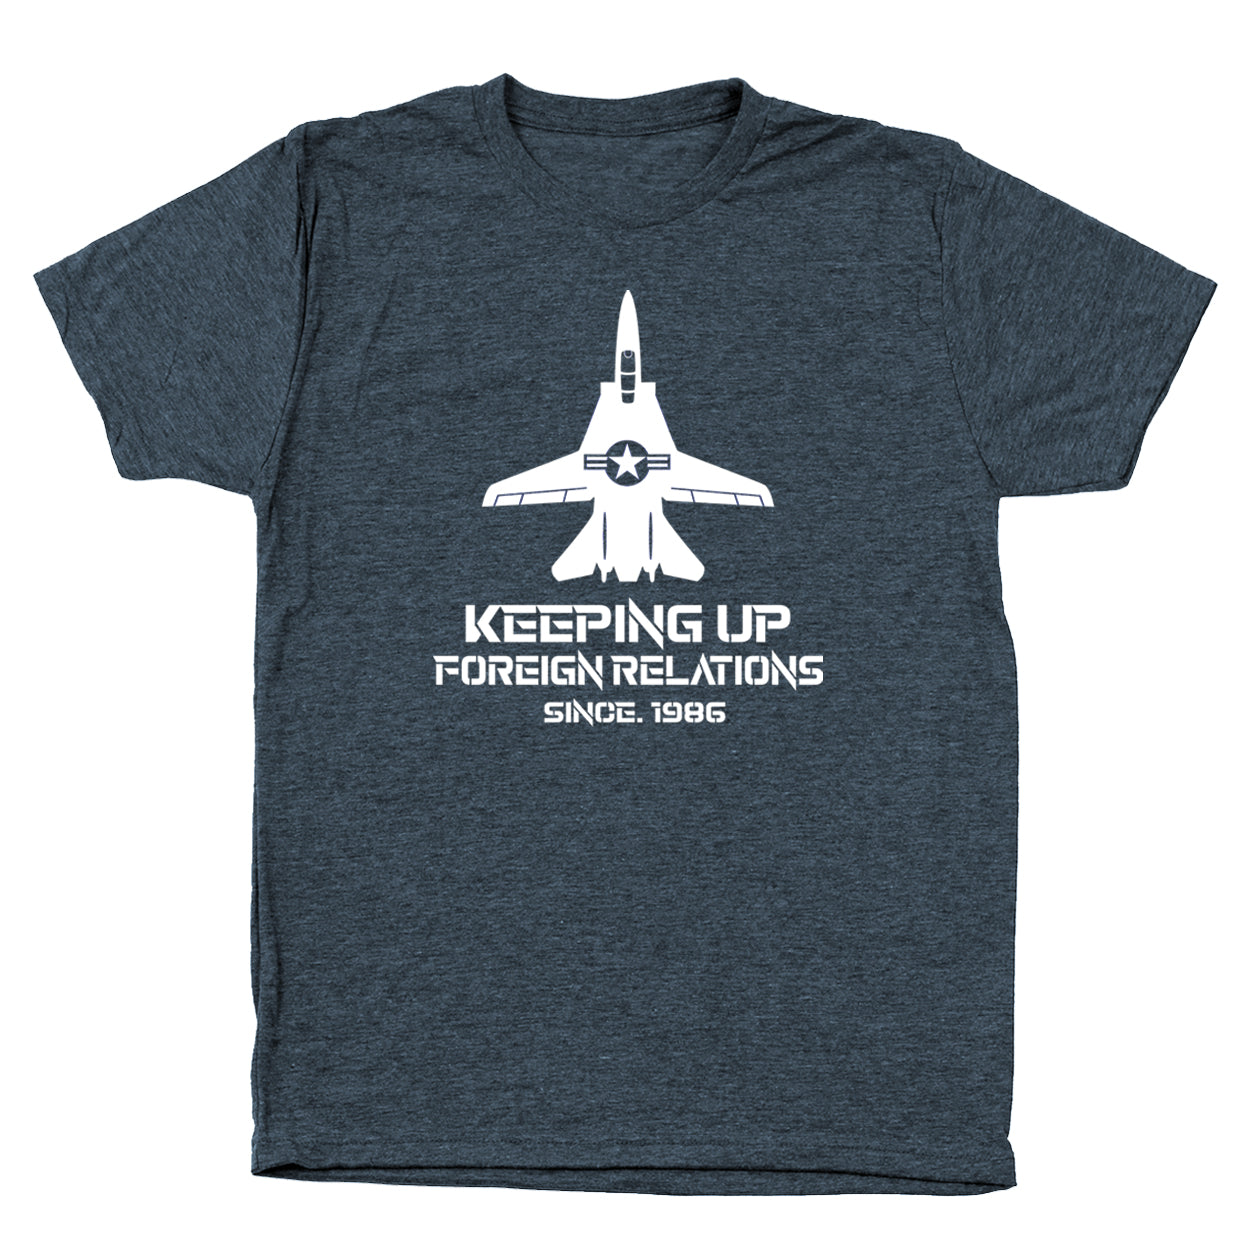 Keeping Up Foreign Relations since 1986 Tshirt - Donkey Tees